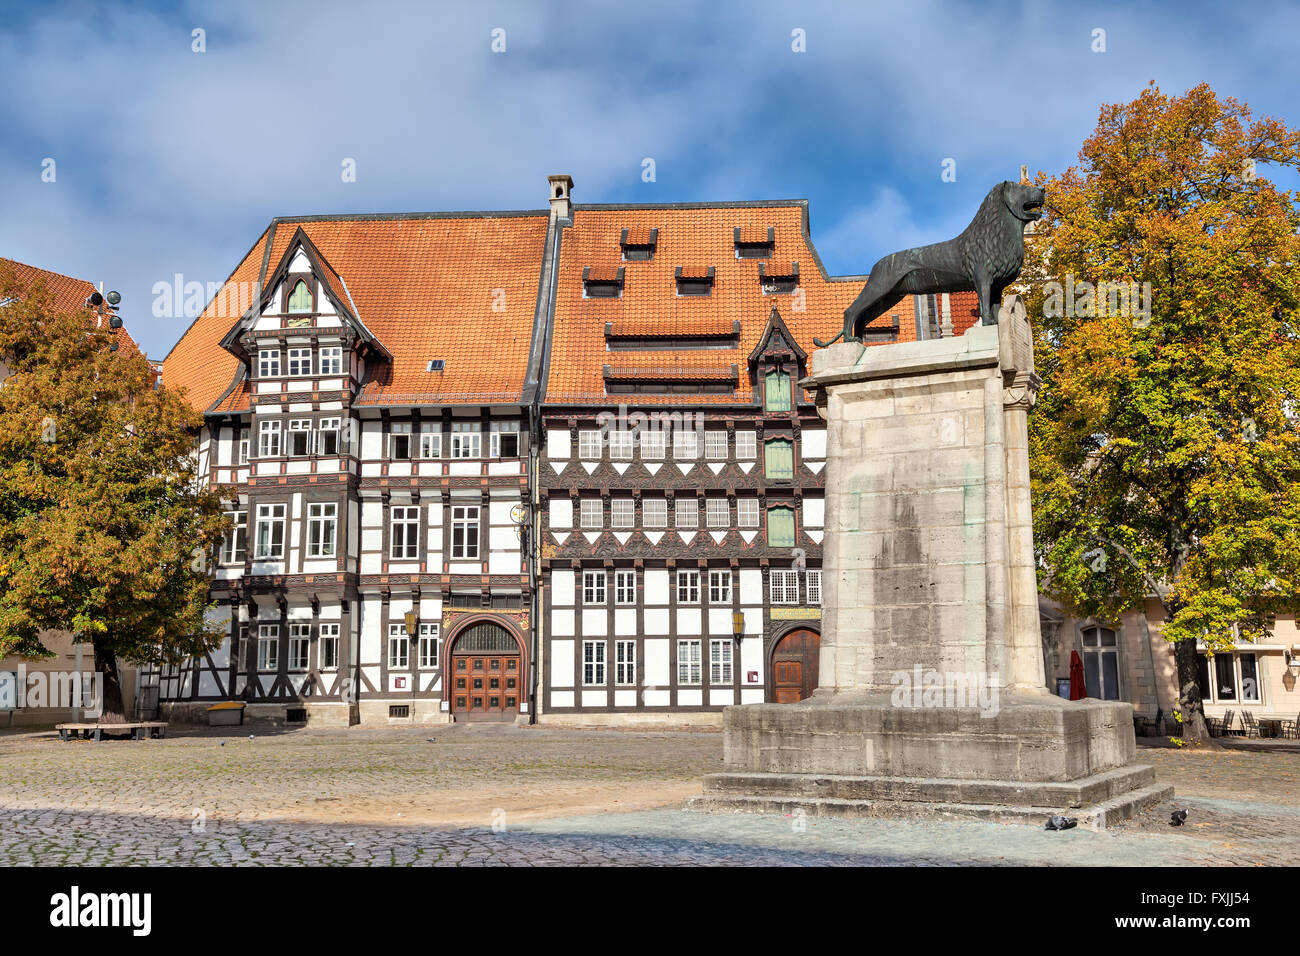 Old half-timbered building and statue of lion on Burgplatz square in Braunschweig, Germany Stock Photo